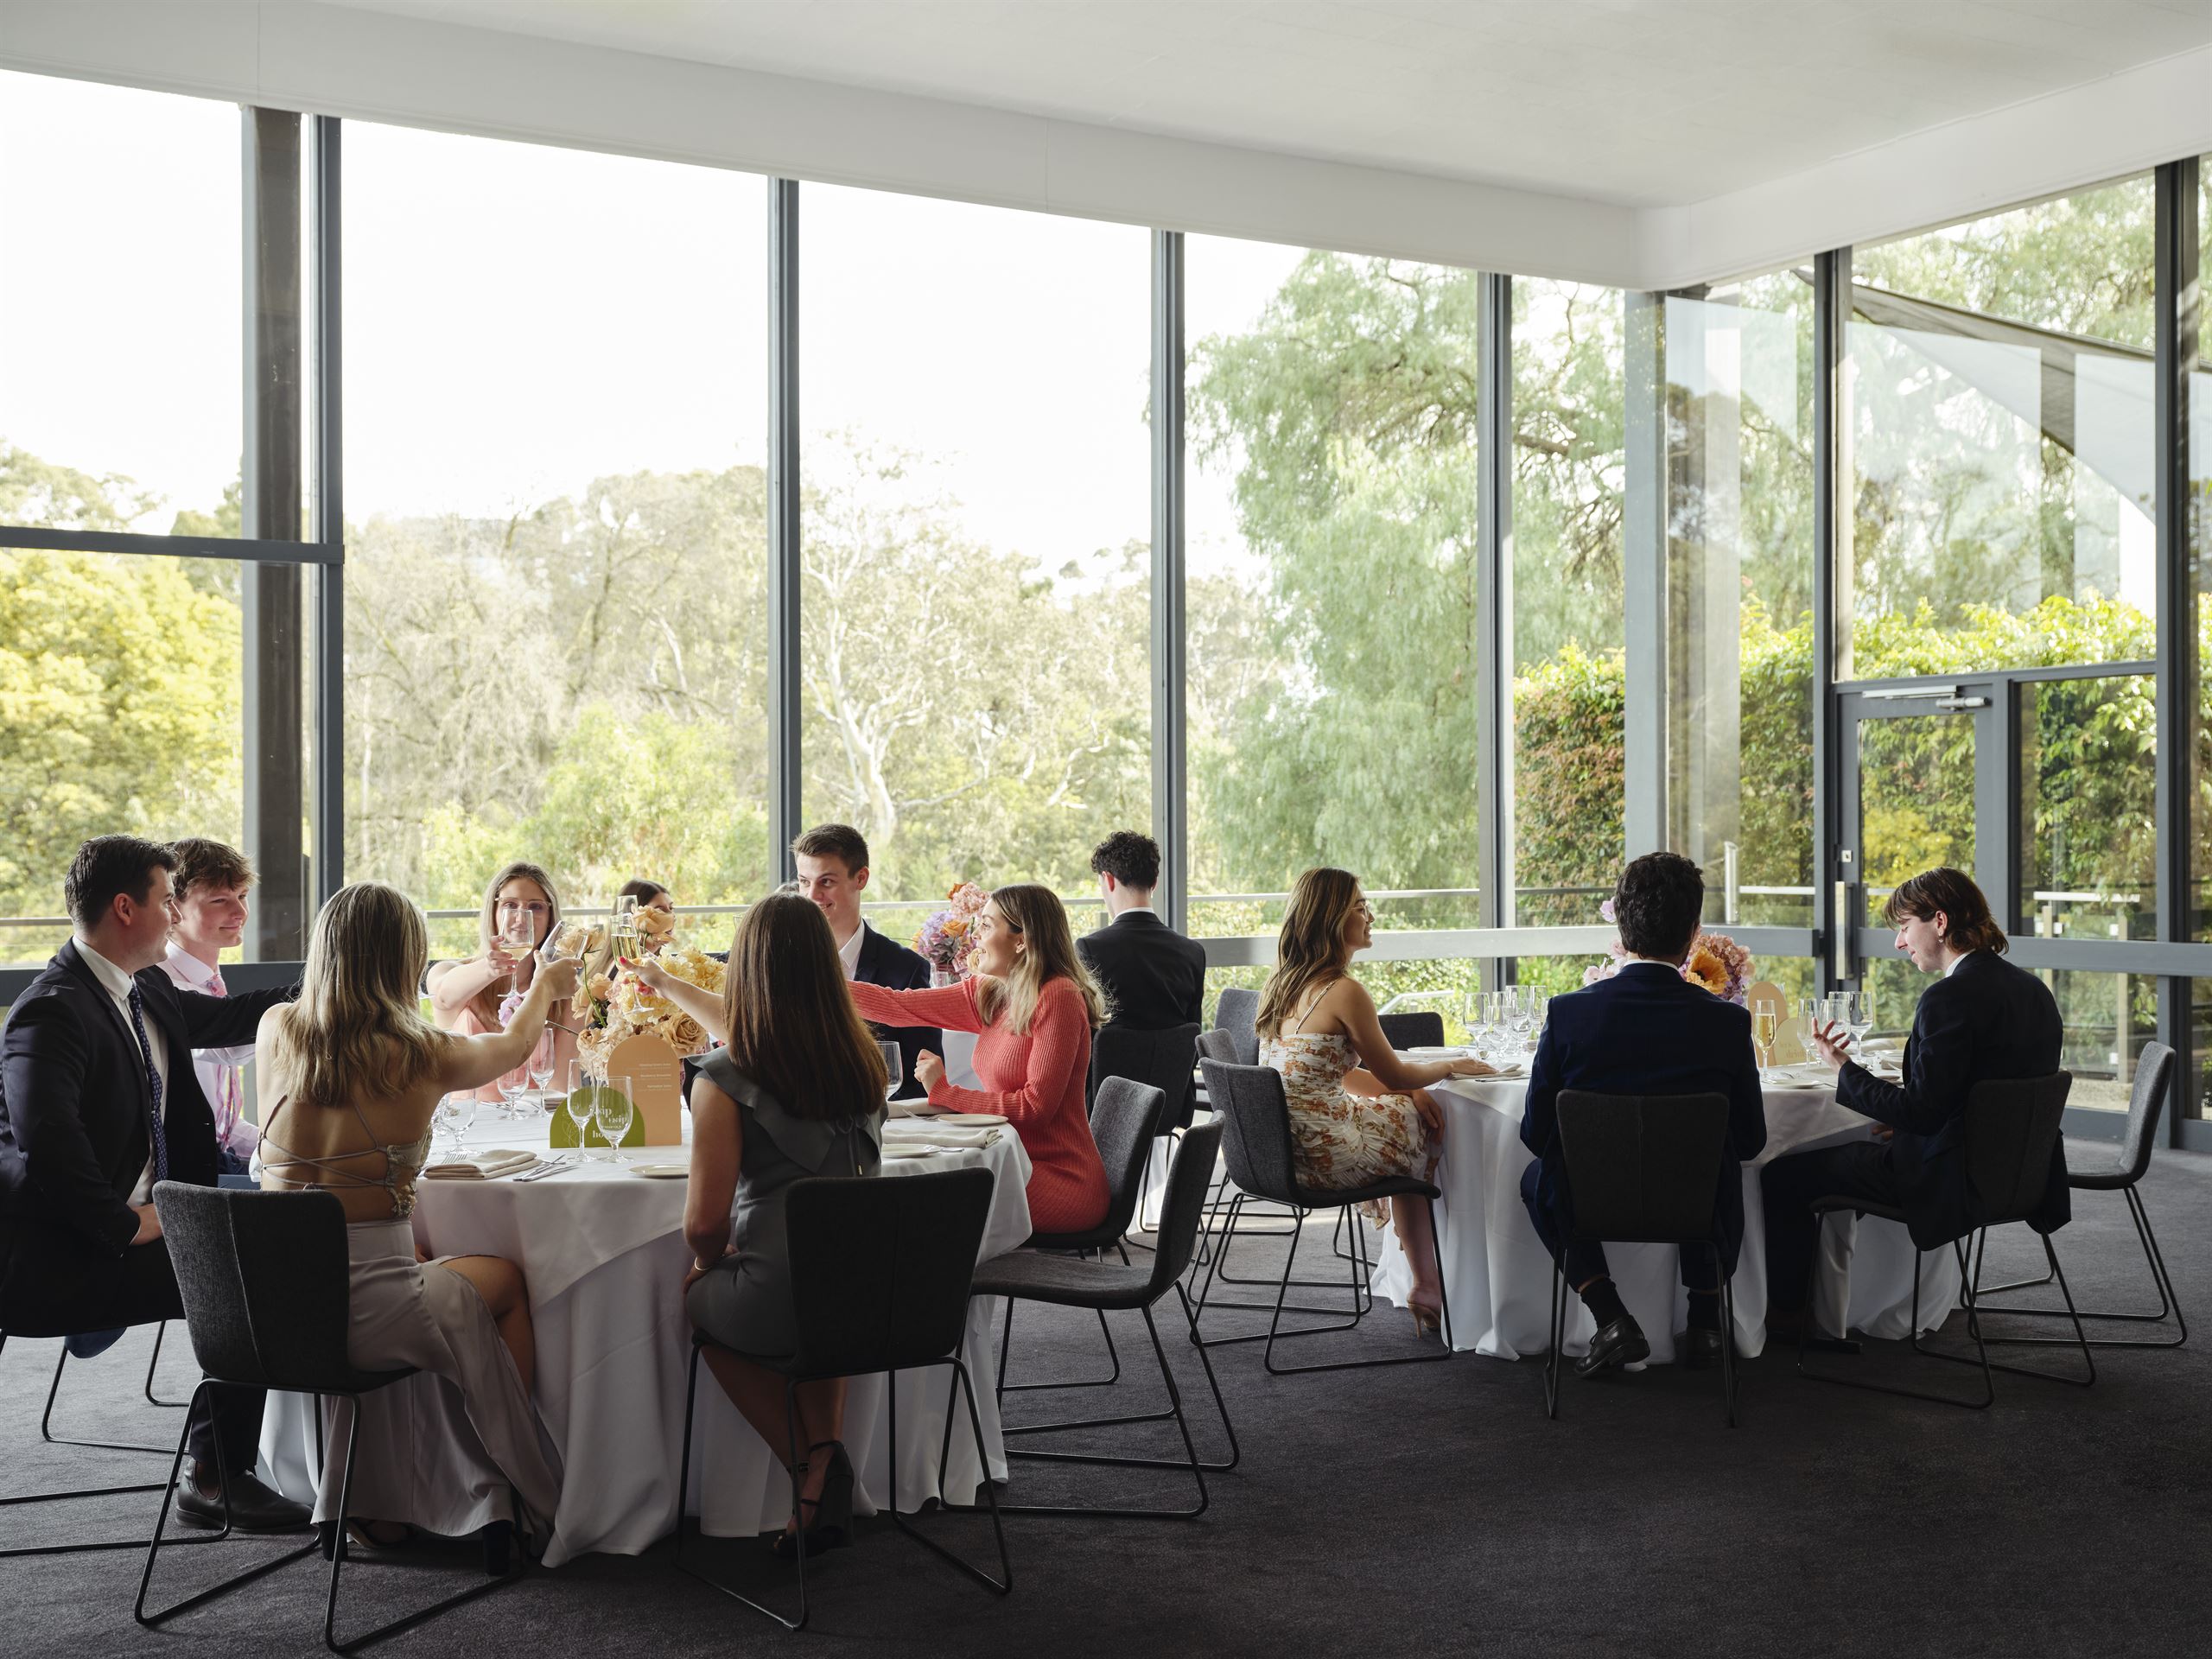 Event venues in Melbourne: spacious ballrooms, elegant banquet halls, and modern conference centres. Perfect for any occasion.